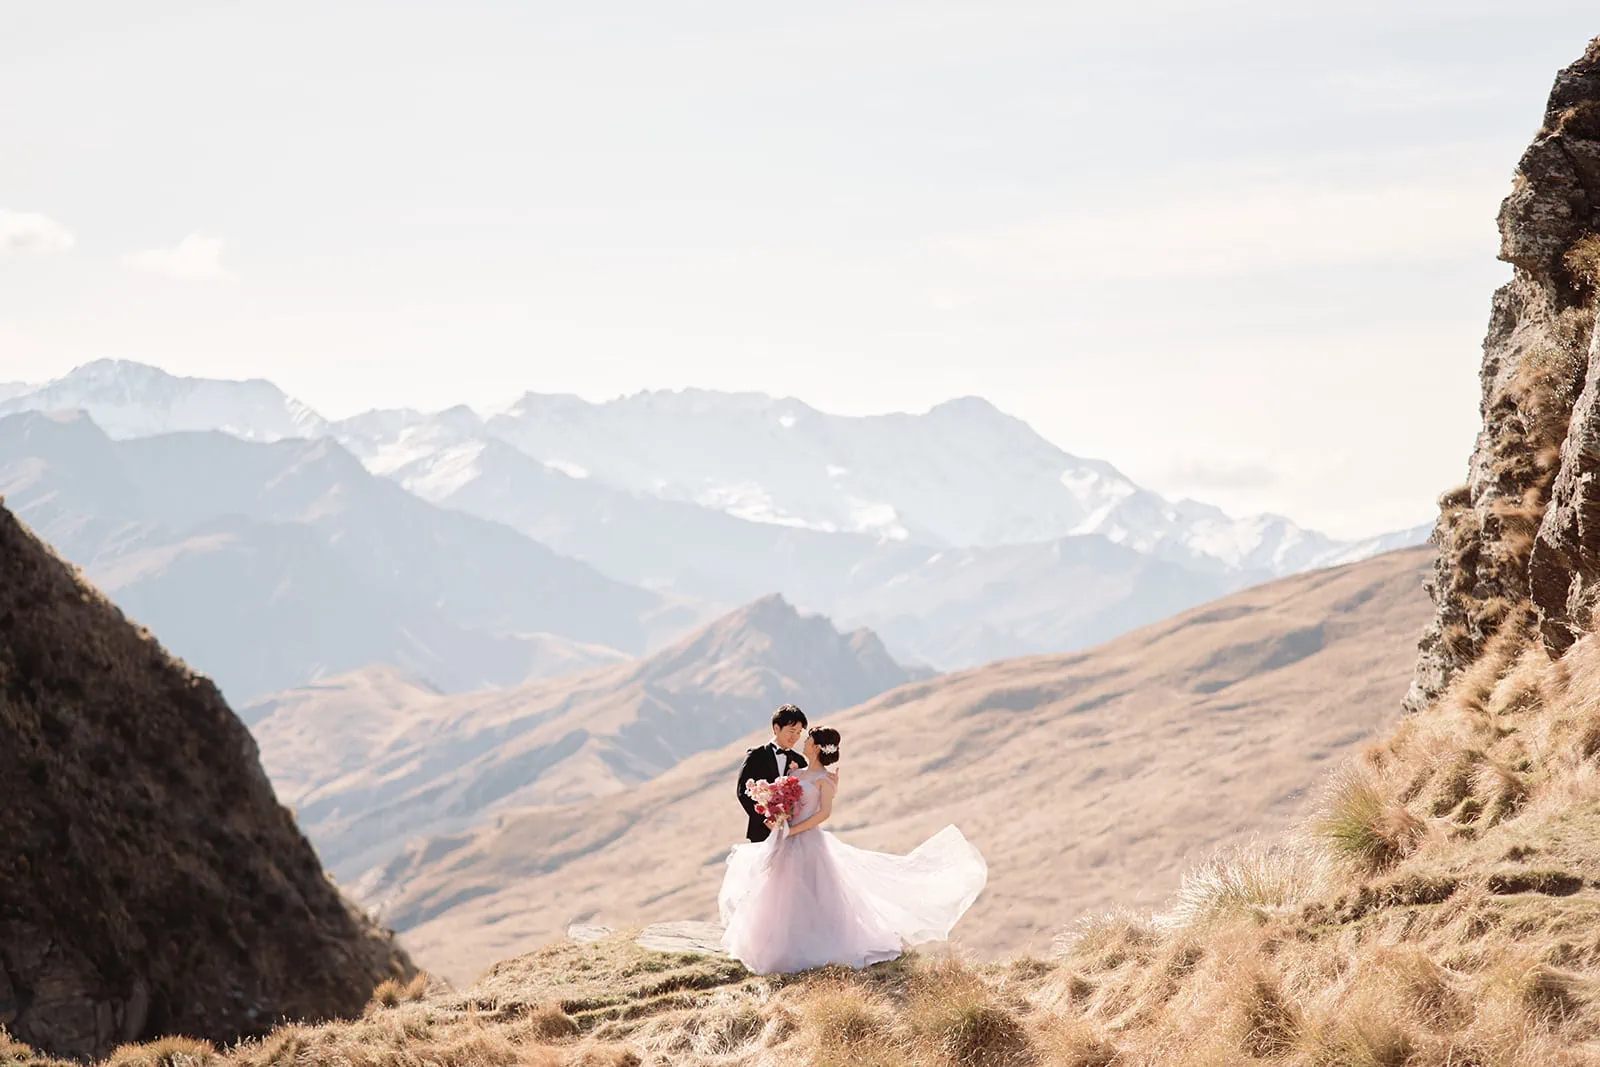 Queenstown New Zealand Elopement Wedding Photographer - A summer bride and groom standing on the side of a mountain in Queenstown, with breathtaking mountainous backgrounds.